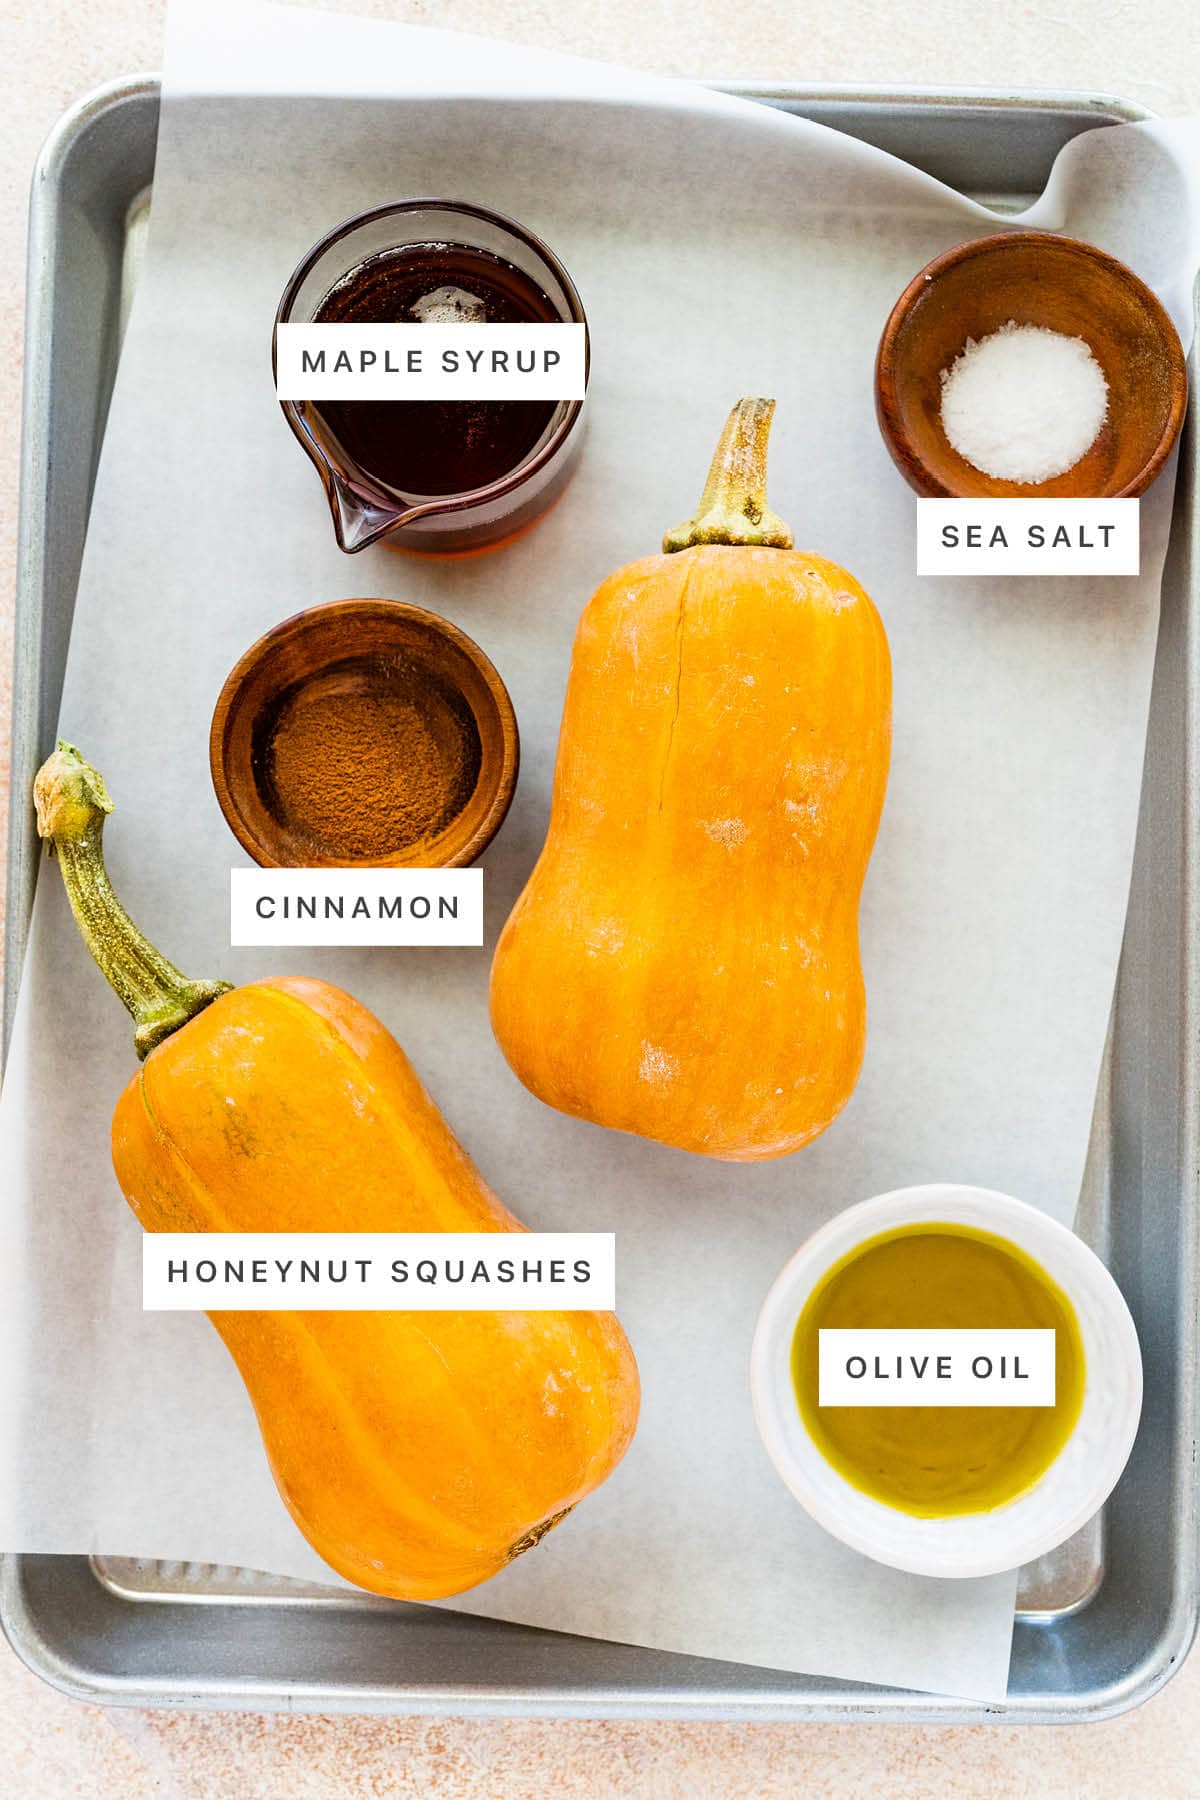 Ingredients measured out to make Roasted Honeynut Squash: maple syrup, sea salt, cinnamon, honeynut squashes and olive oil.